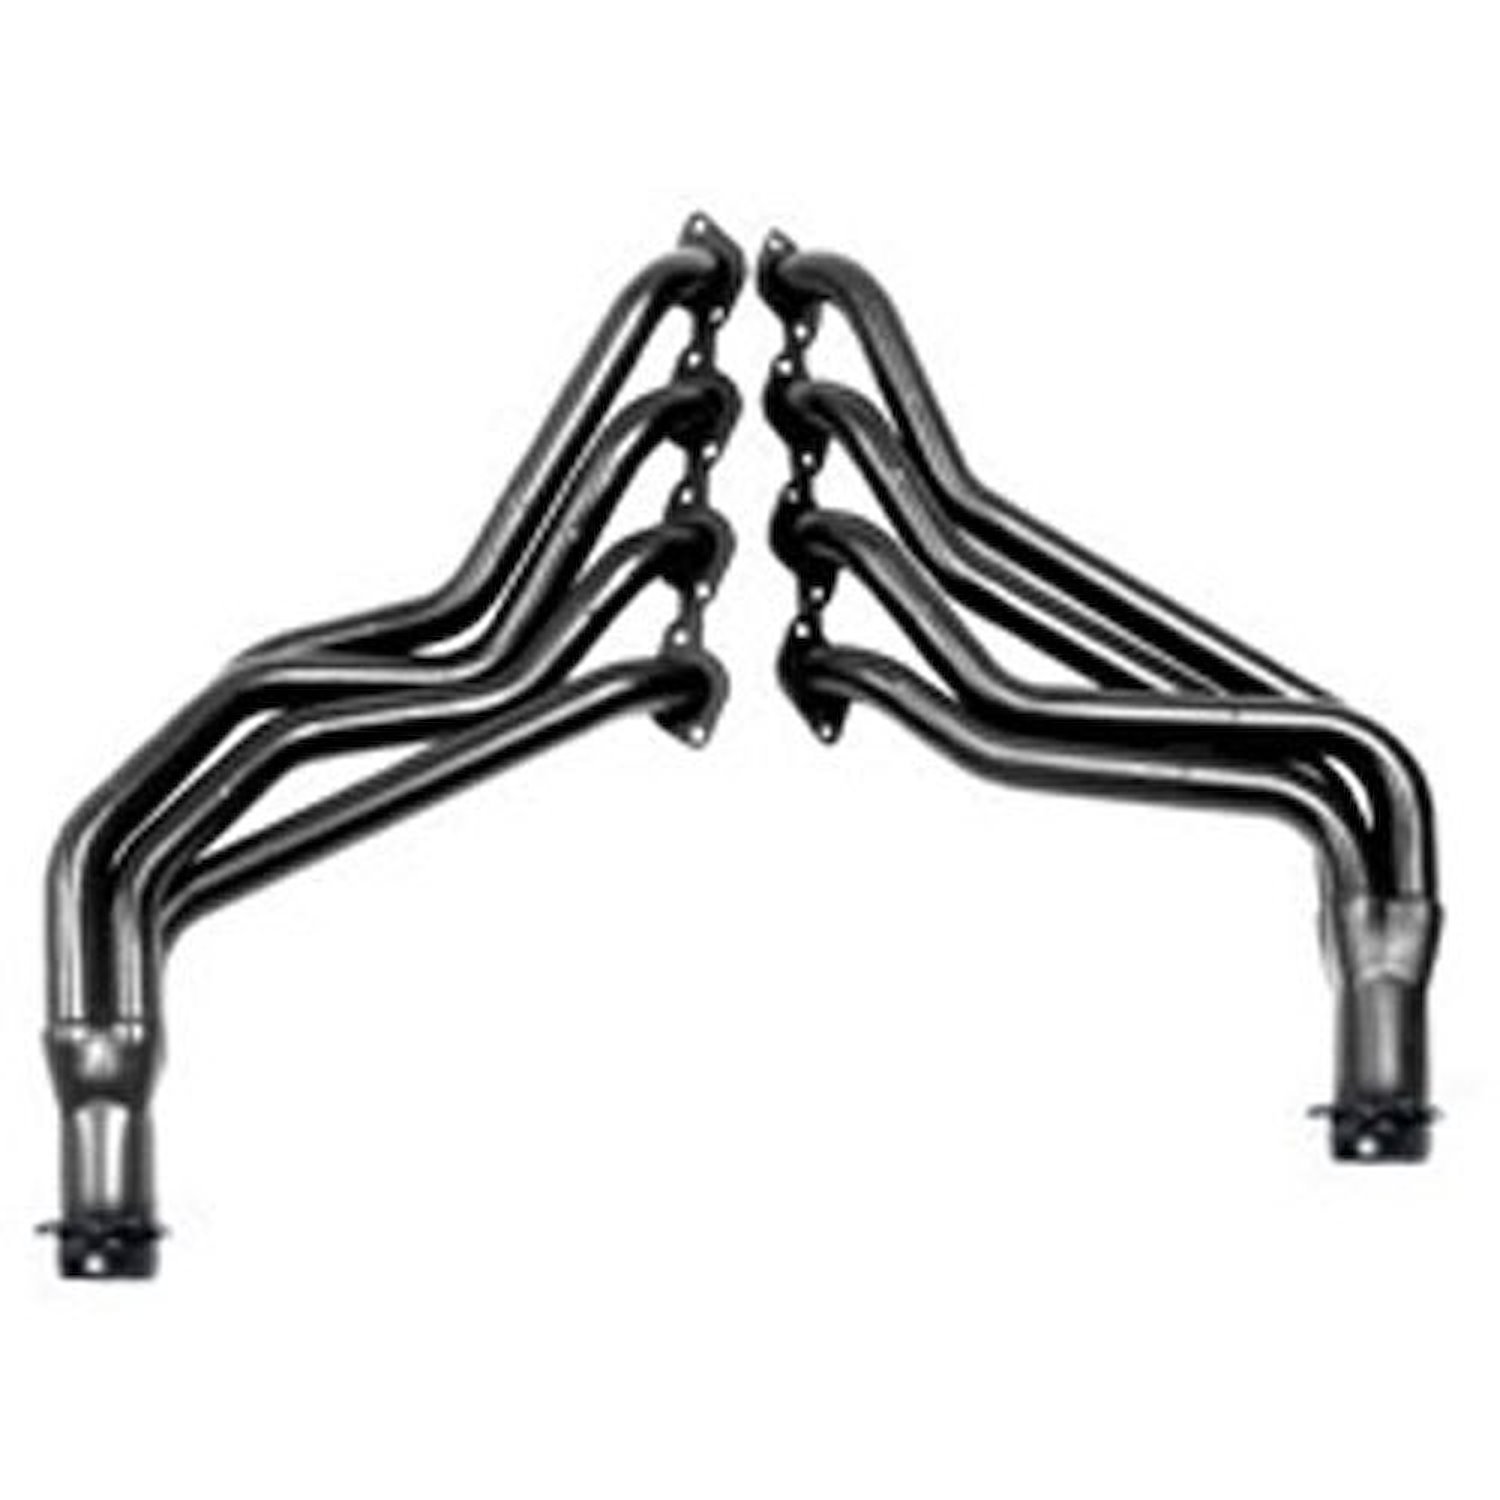 Standard Duty Uncoated Full Length Headers for 1975-86 P30 Van & Class A Motorhome 396-454